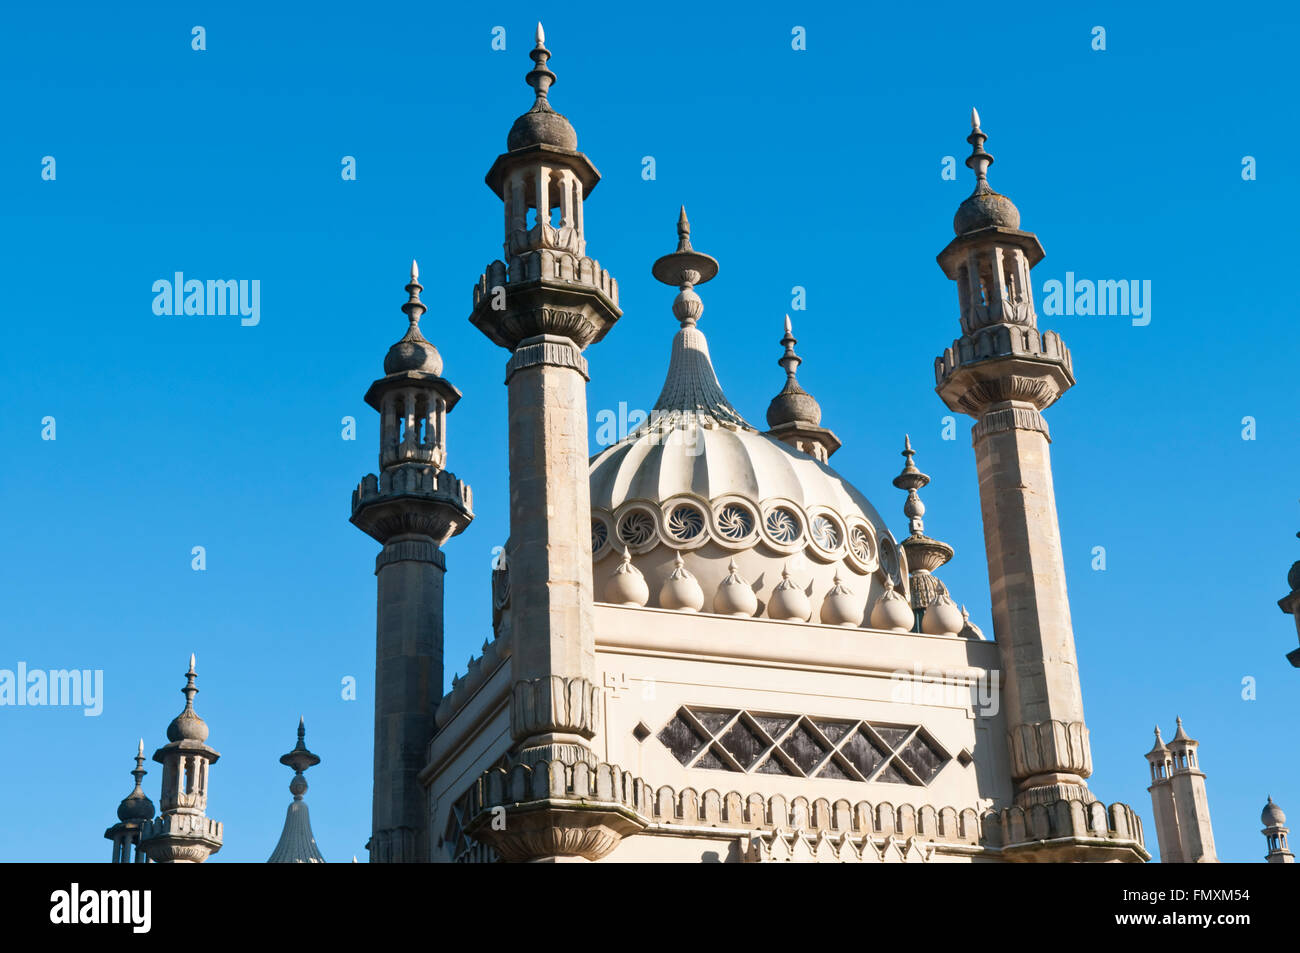 Detail of the columns, towers and domes of the Royal Pavilion in Brighton, East Sussex, England at sunset Stock Photo